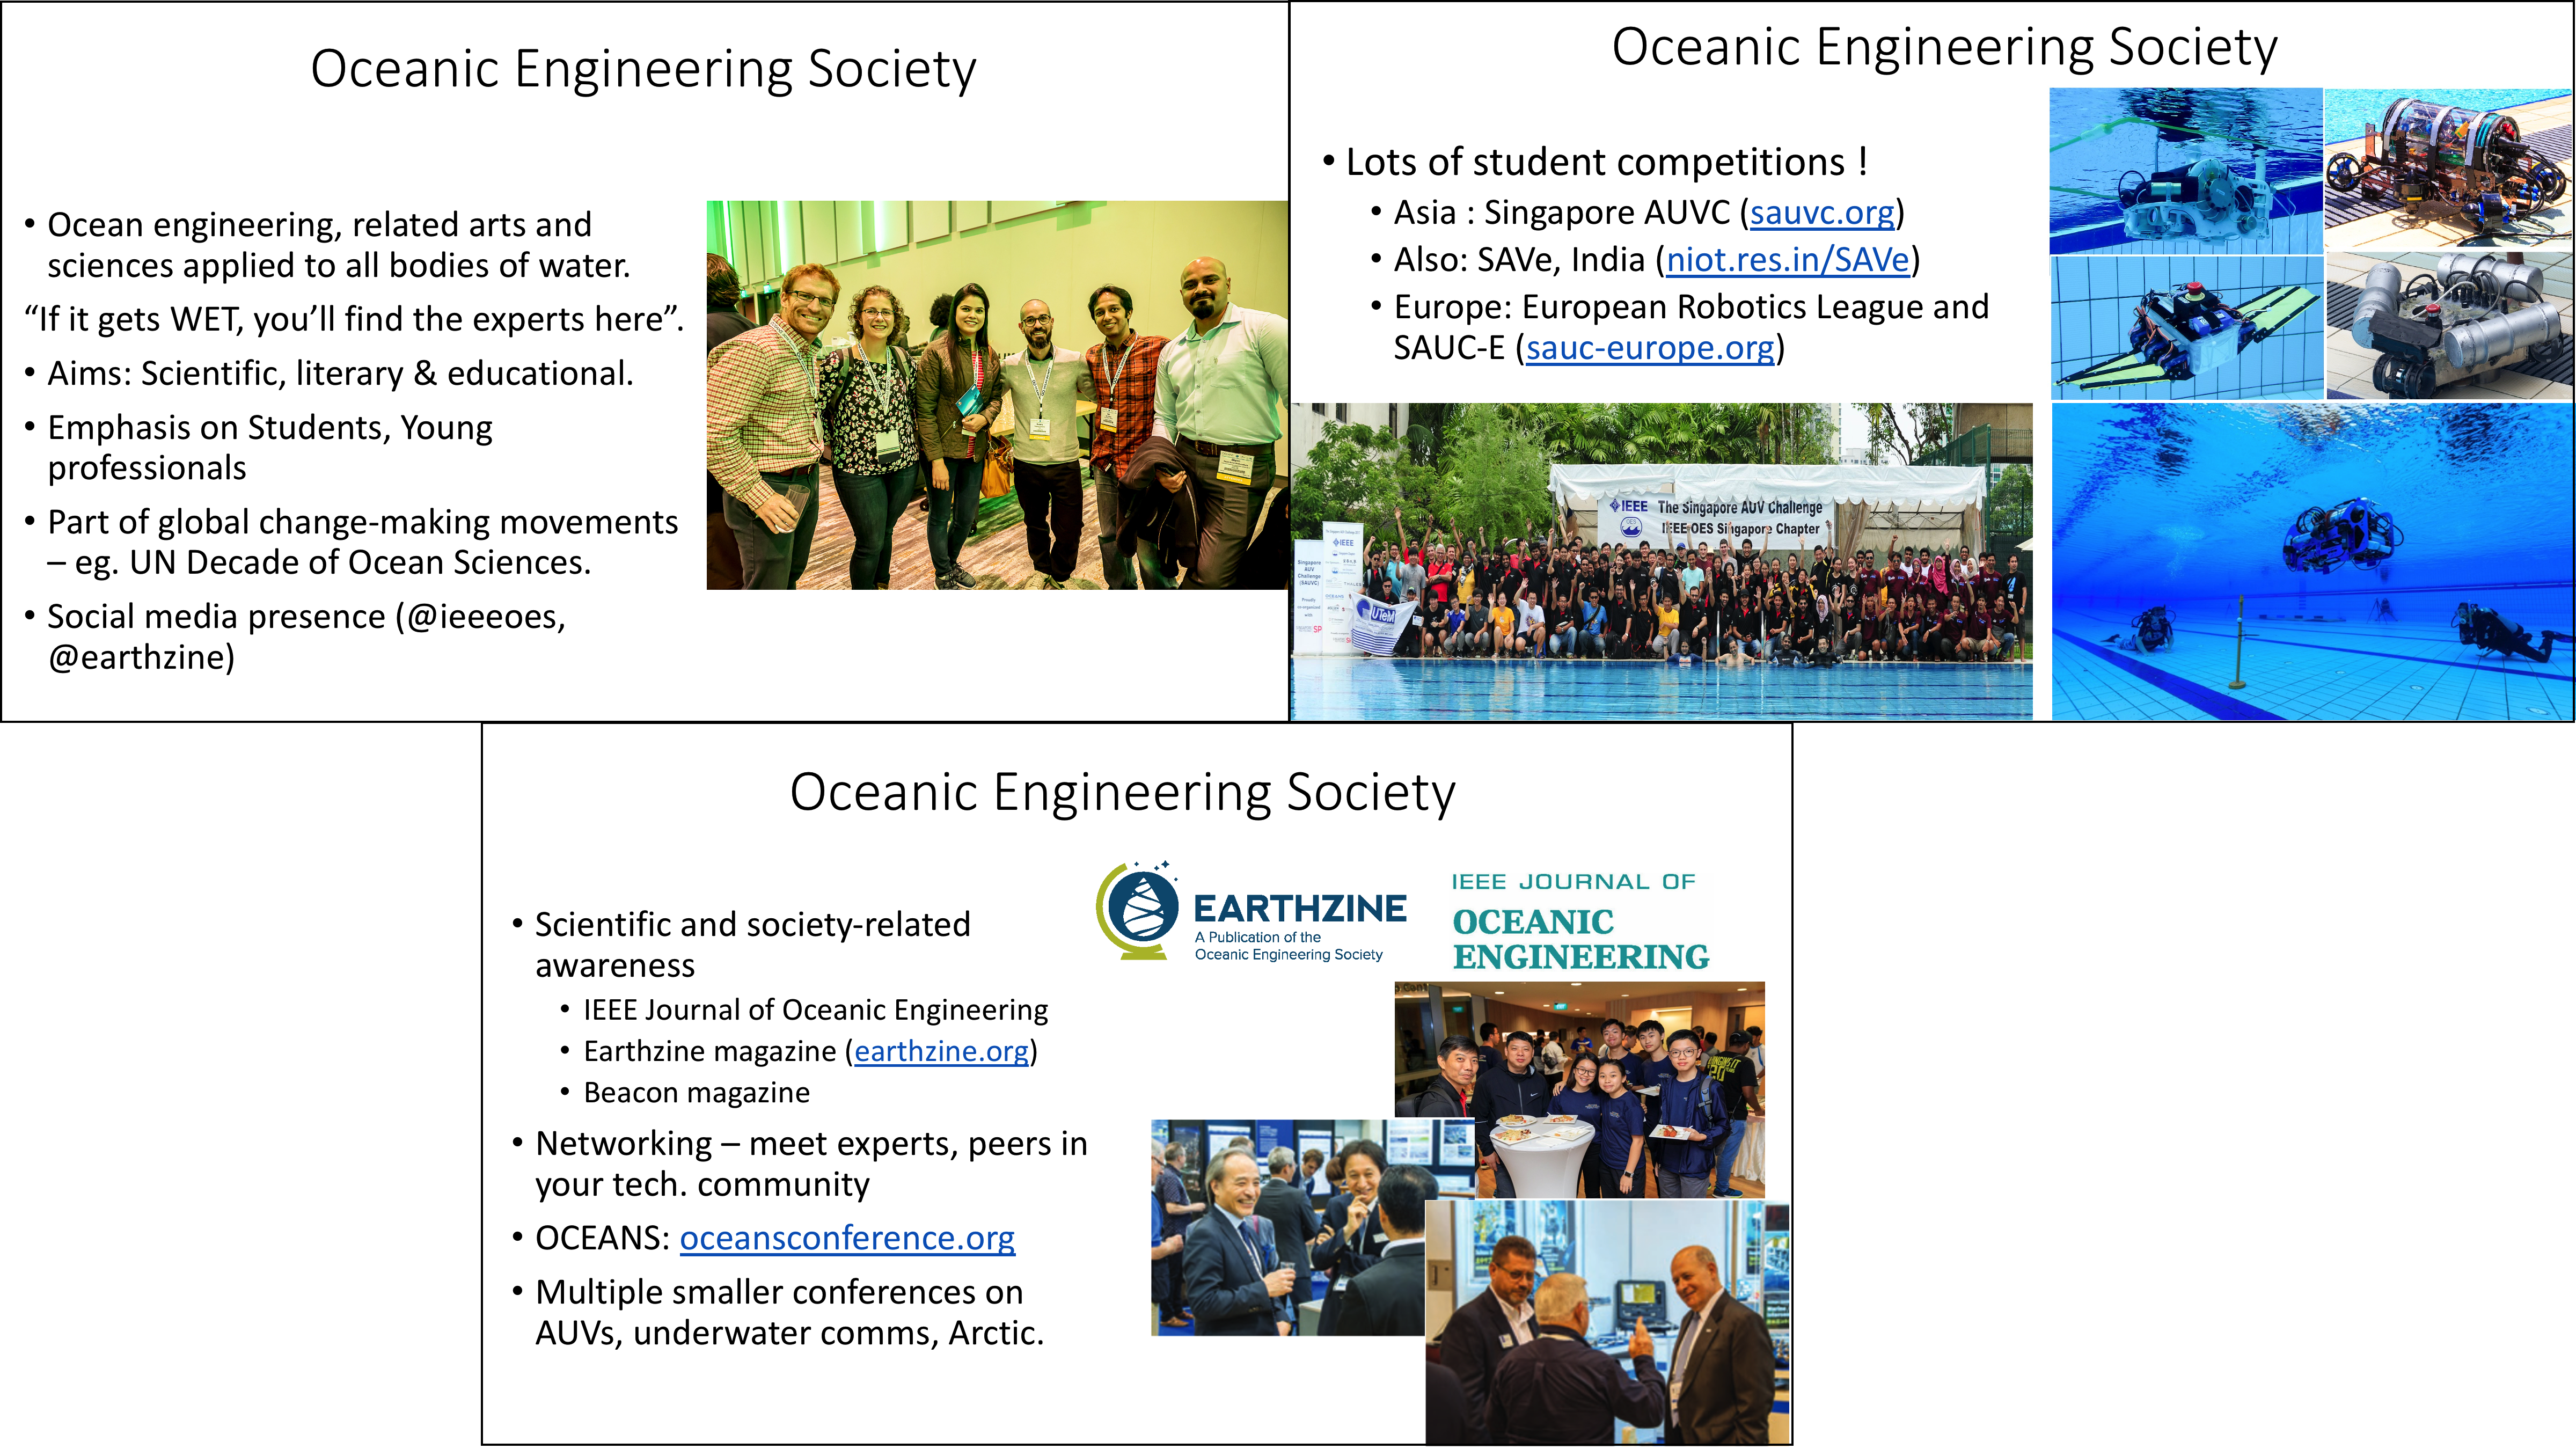 Some of our slides on OES activities